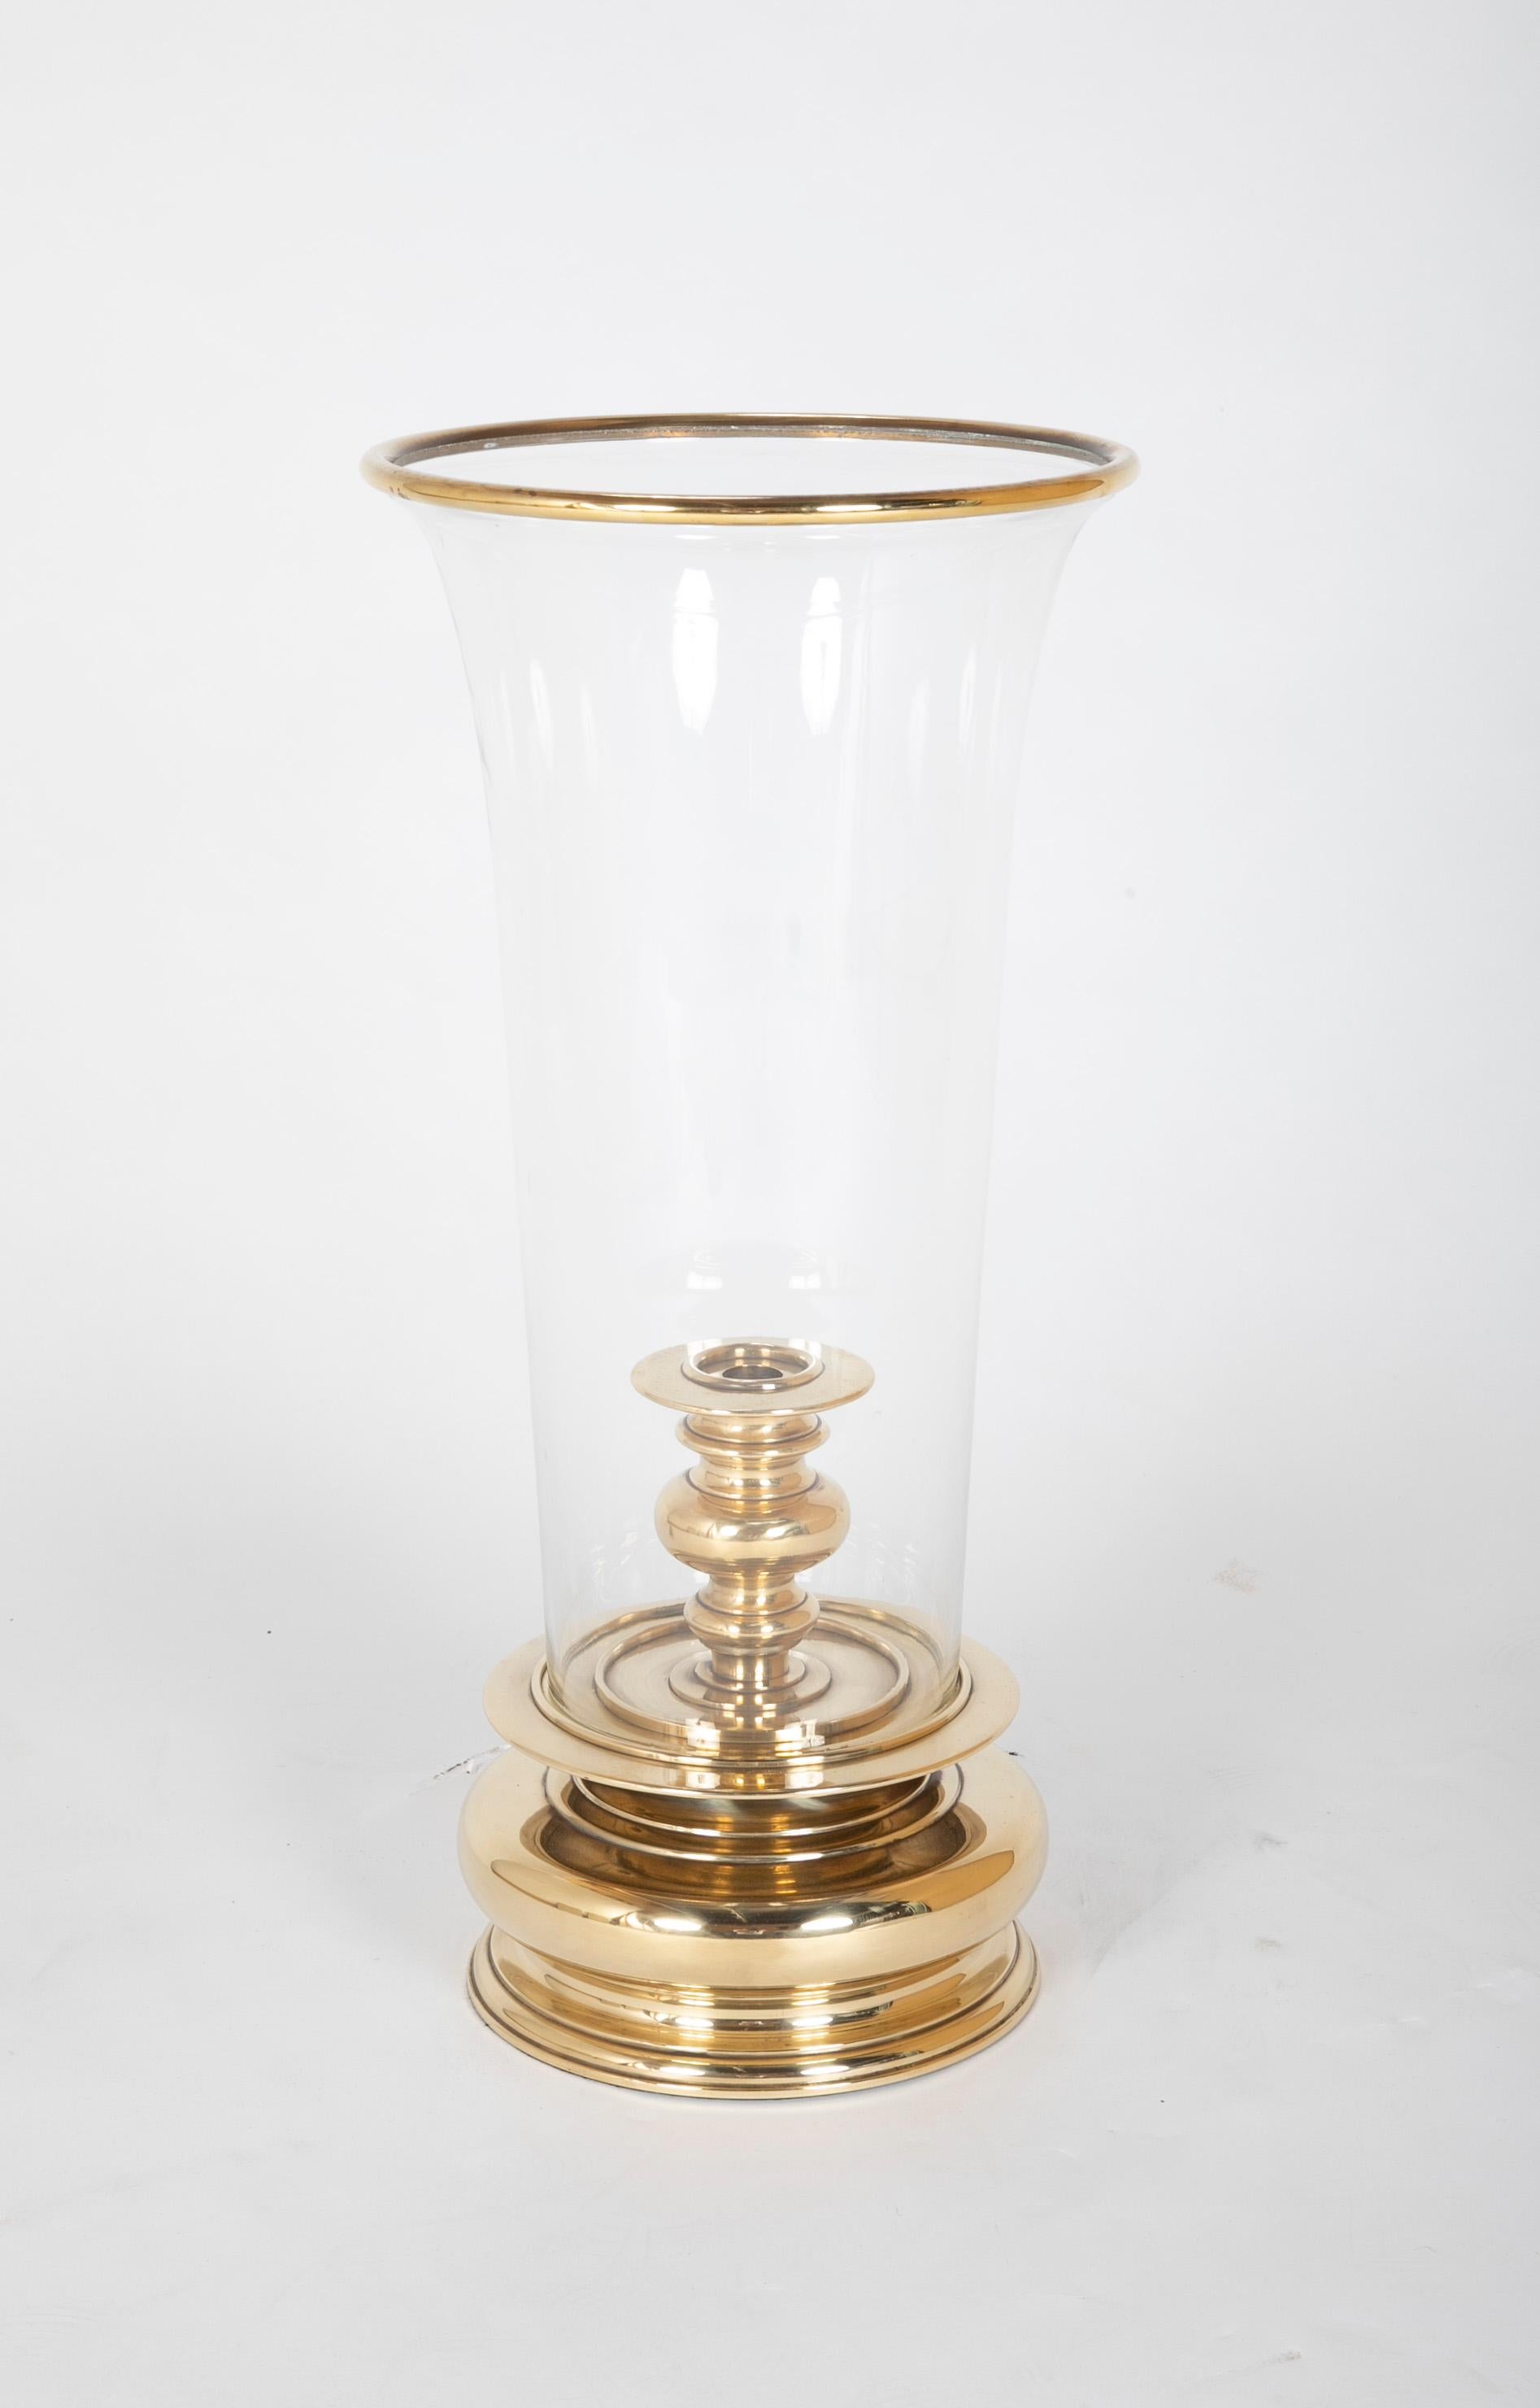 Turned Pair of Monumental Brass Hurricane Lamps by Chapman